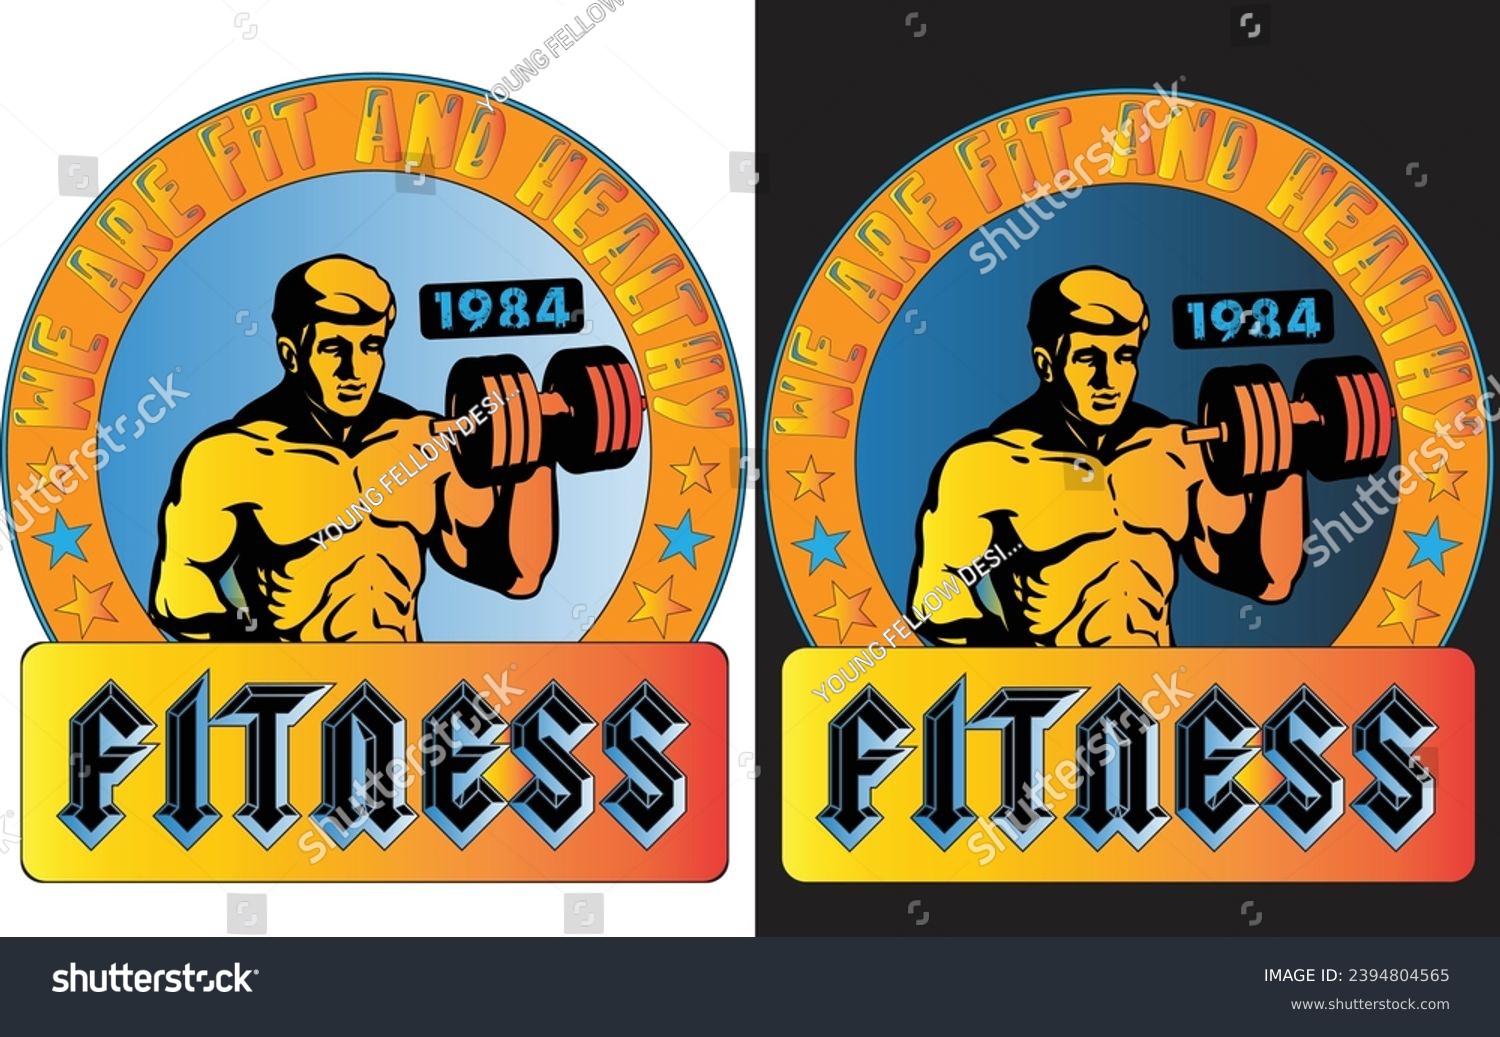 SVG of Fitness T-Shirt Design.
 
We Are Fit And Health.
 svg